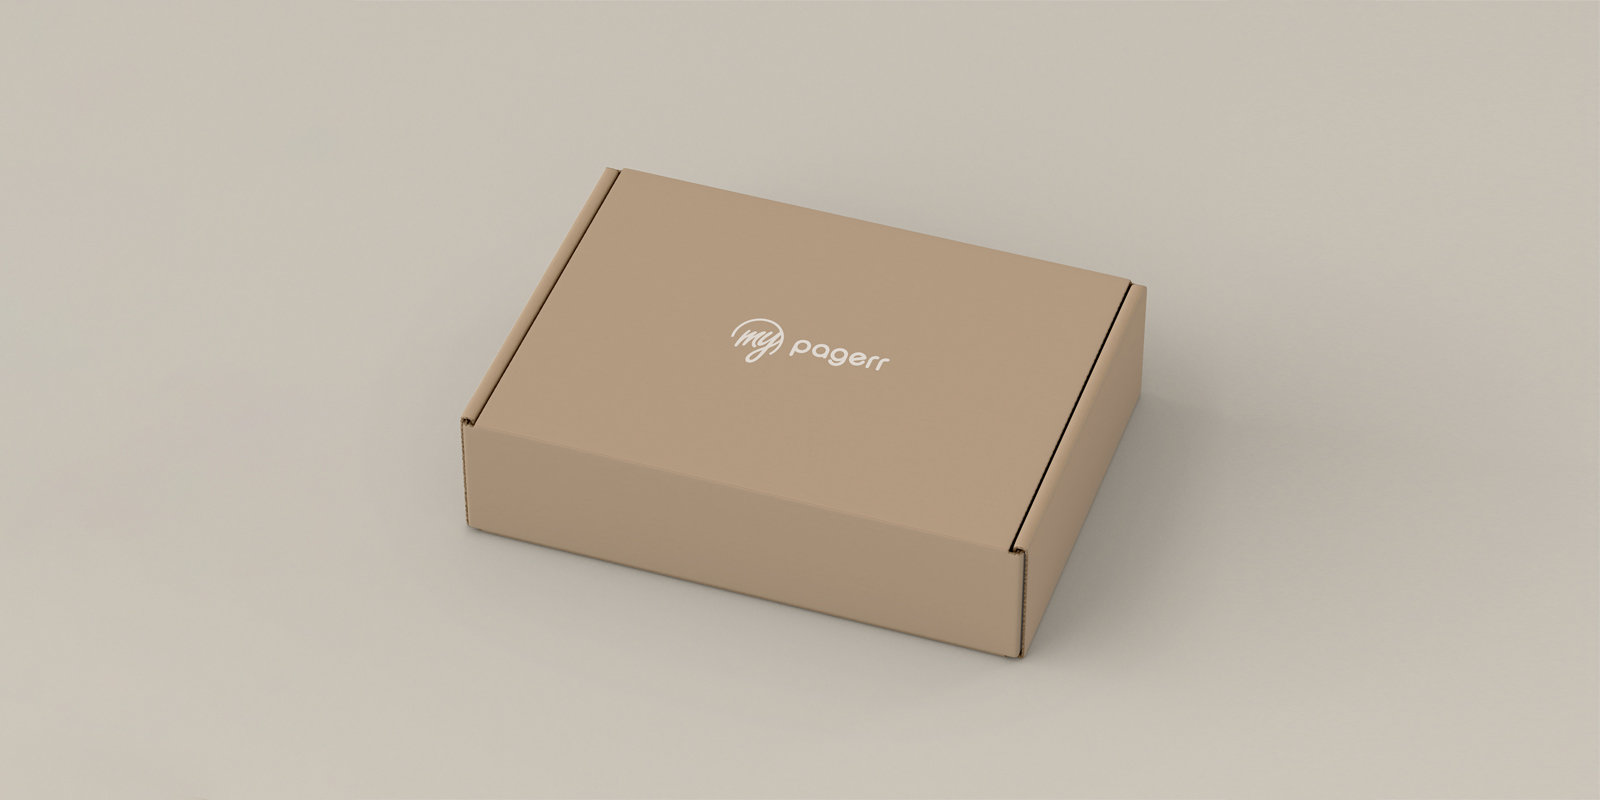 Bespoke boxes in Adelaide - Print with Pagerr